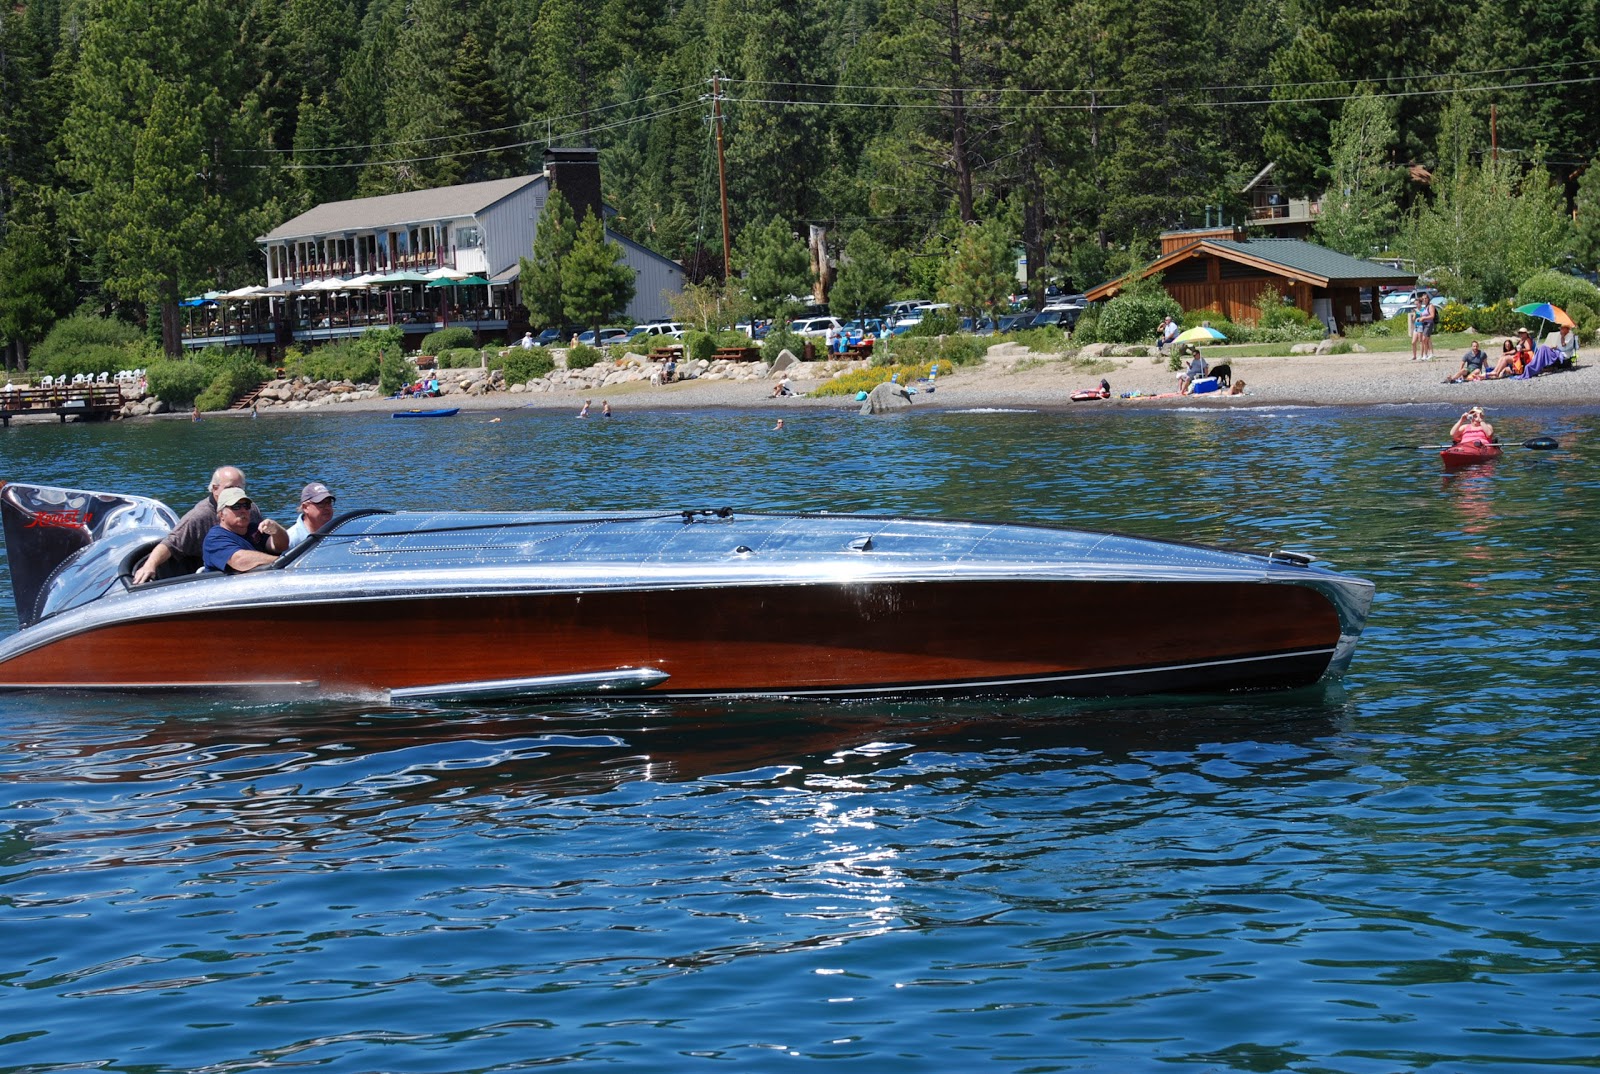 Lake tahoe wooden boat show